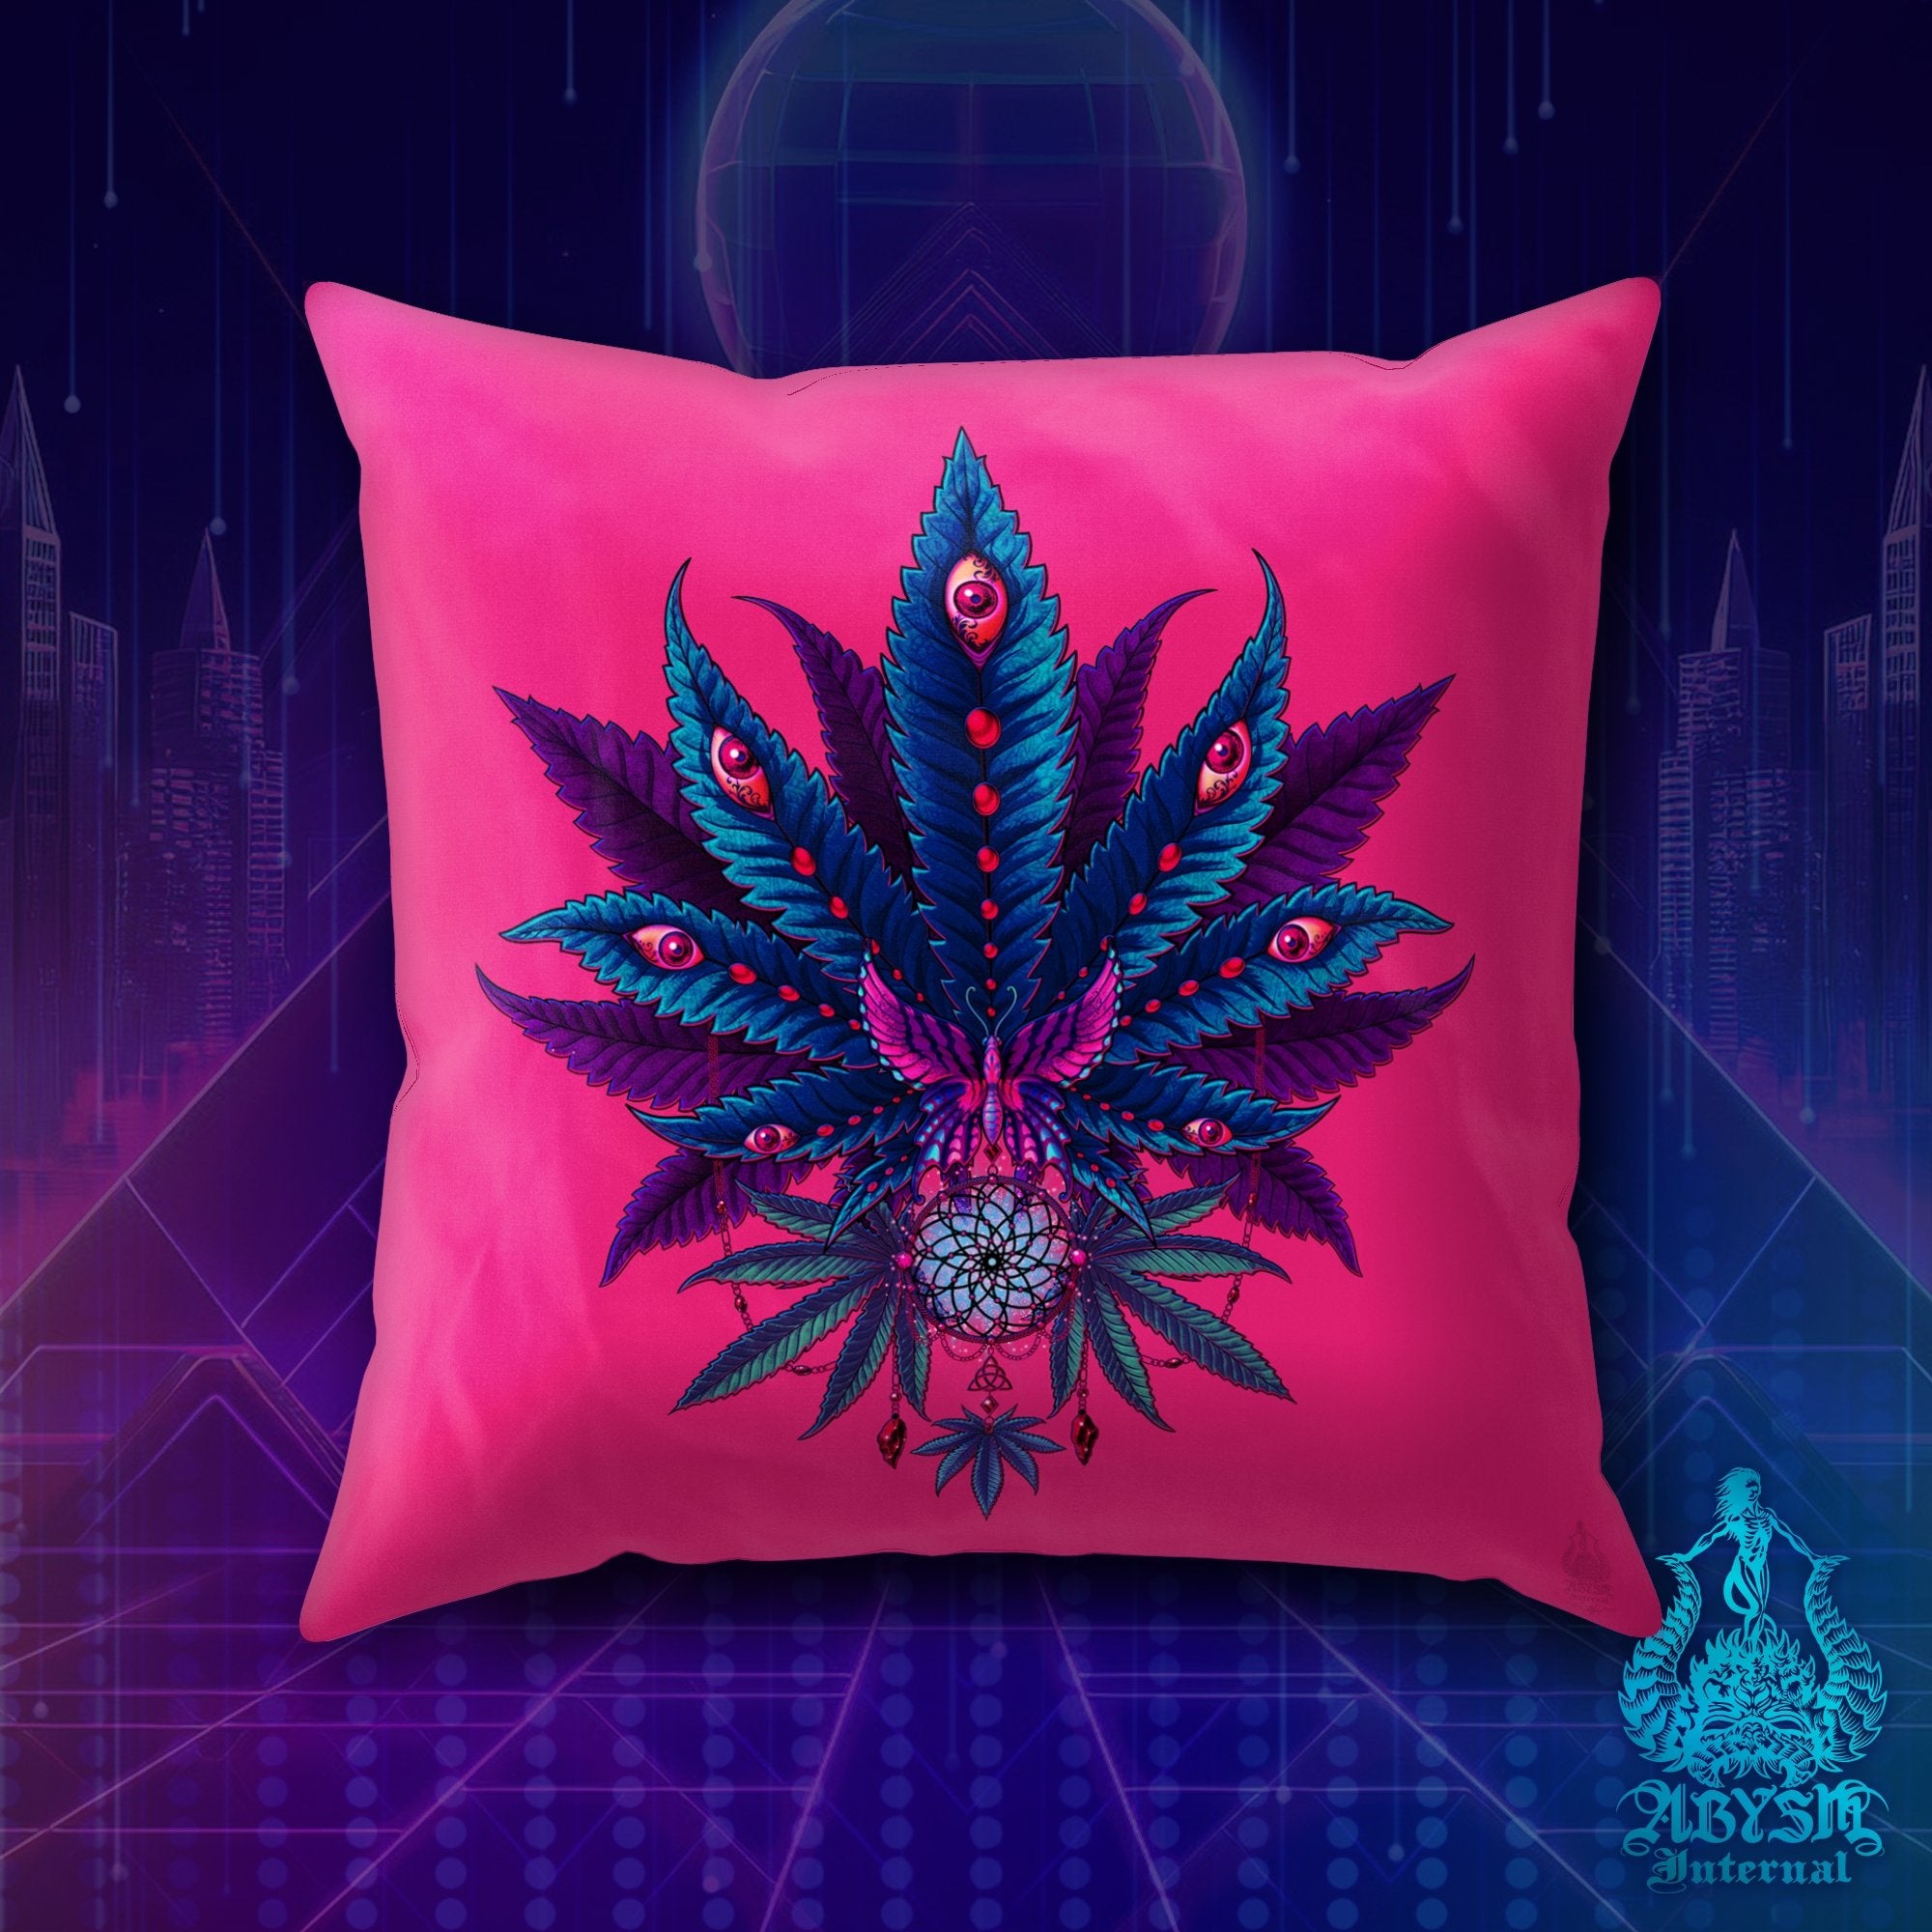 Weed Throw Pillow, Cannabis Shop Decor, Vaporwave Decorative Accent Cushion, Retrowave 80s Room Decor, Synthwave and Psychedelic 420 Art Print - Neon I - Abysm Internal